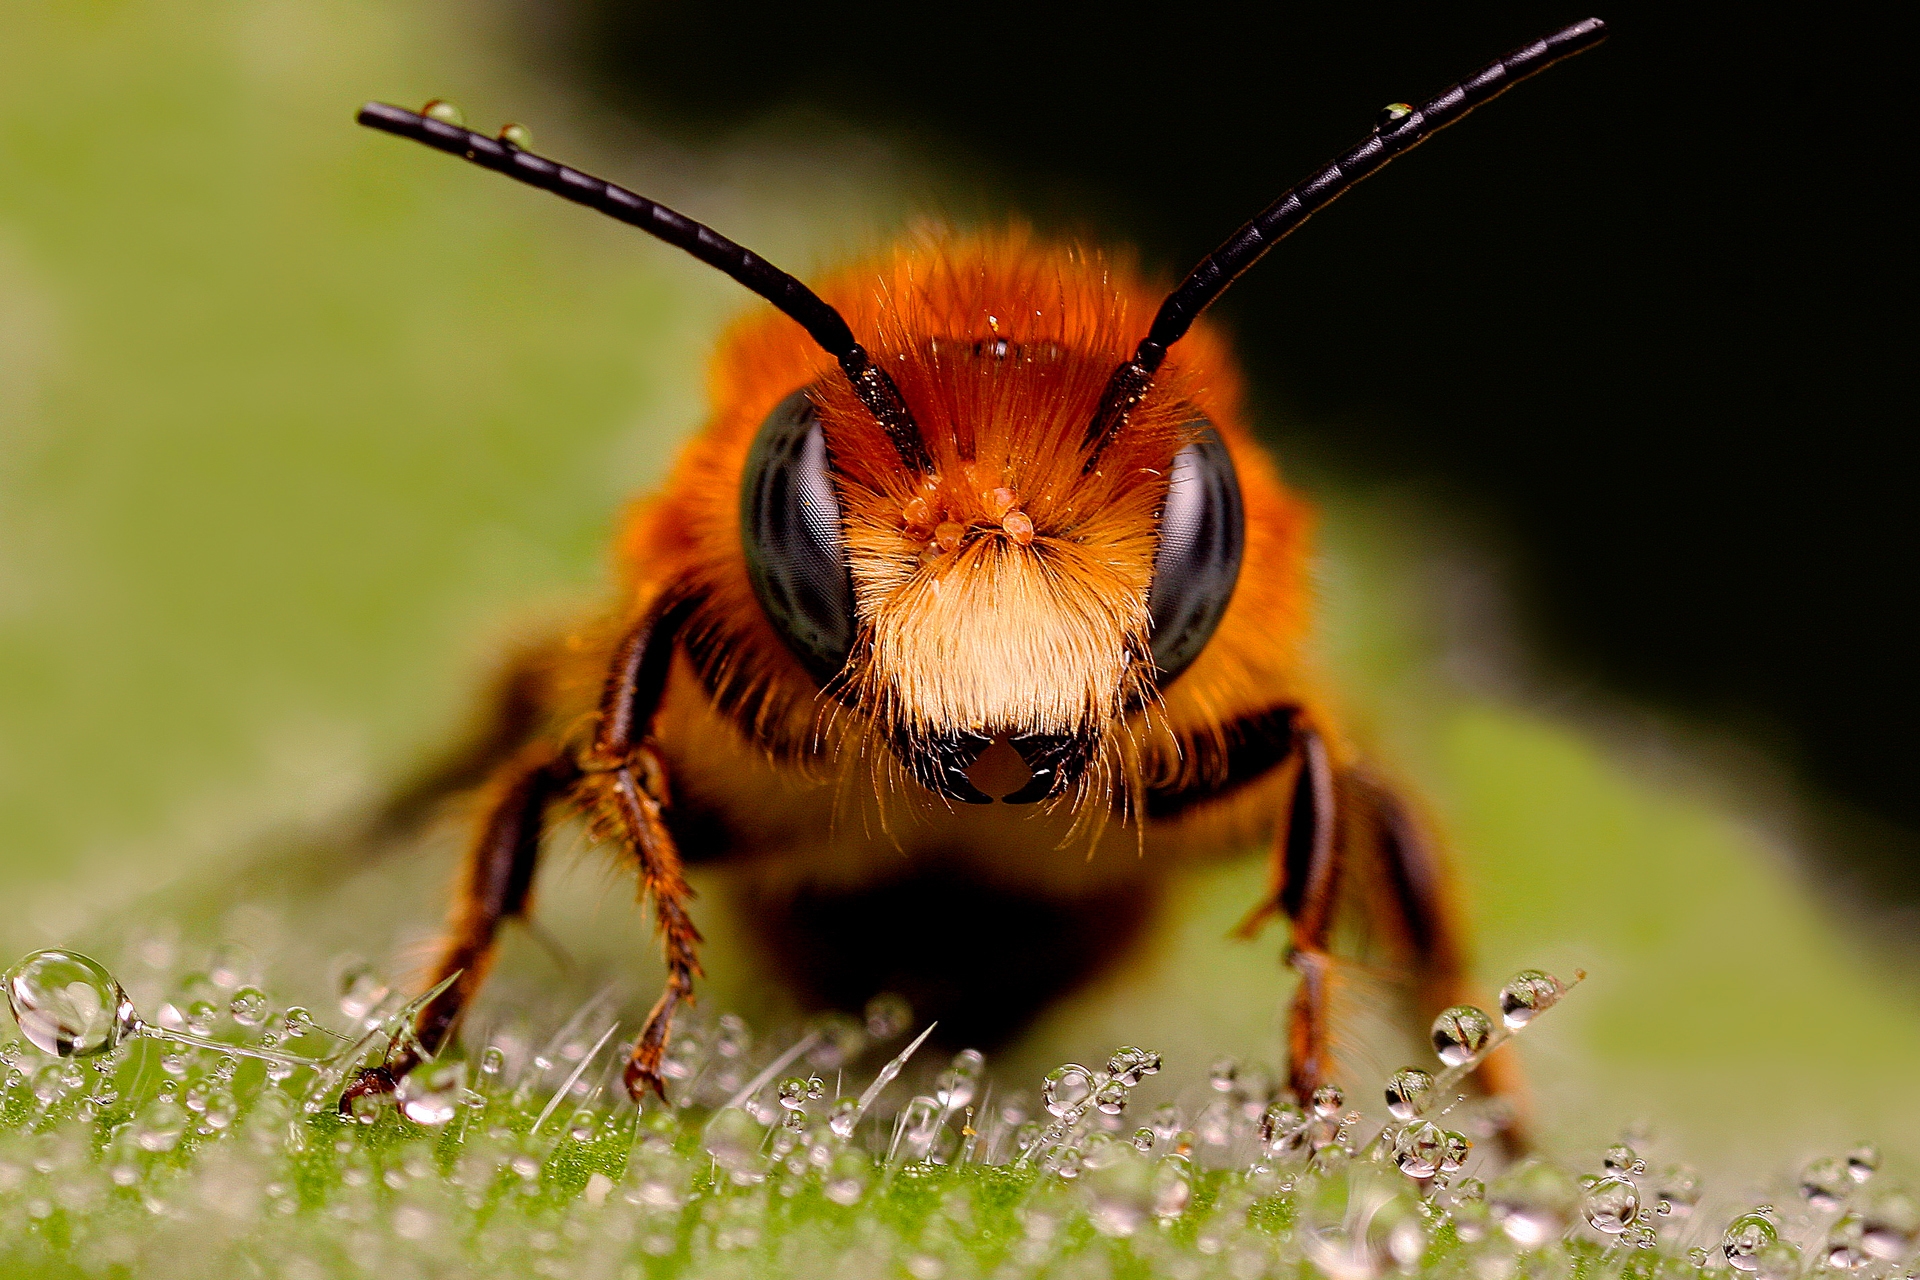 64337 Screensavers and Wallpapers Insect for phone. Download insect, drops, macro, eyes, surface, bee pictures for free